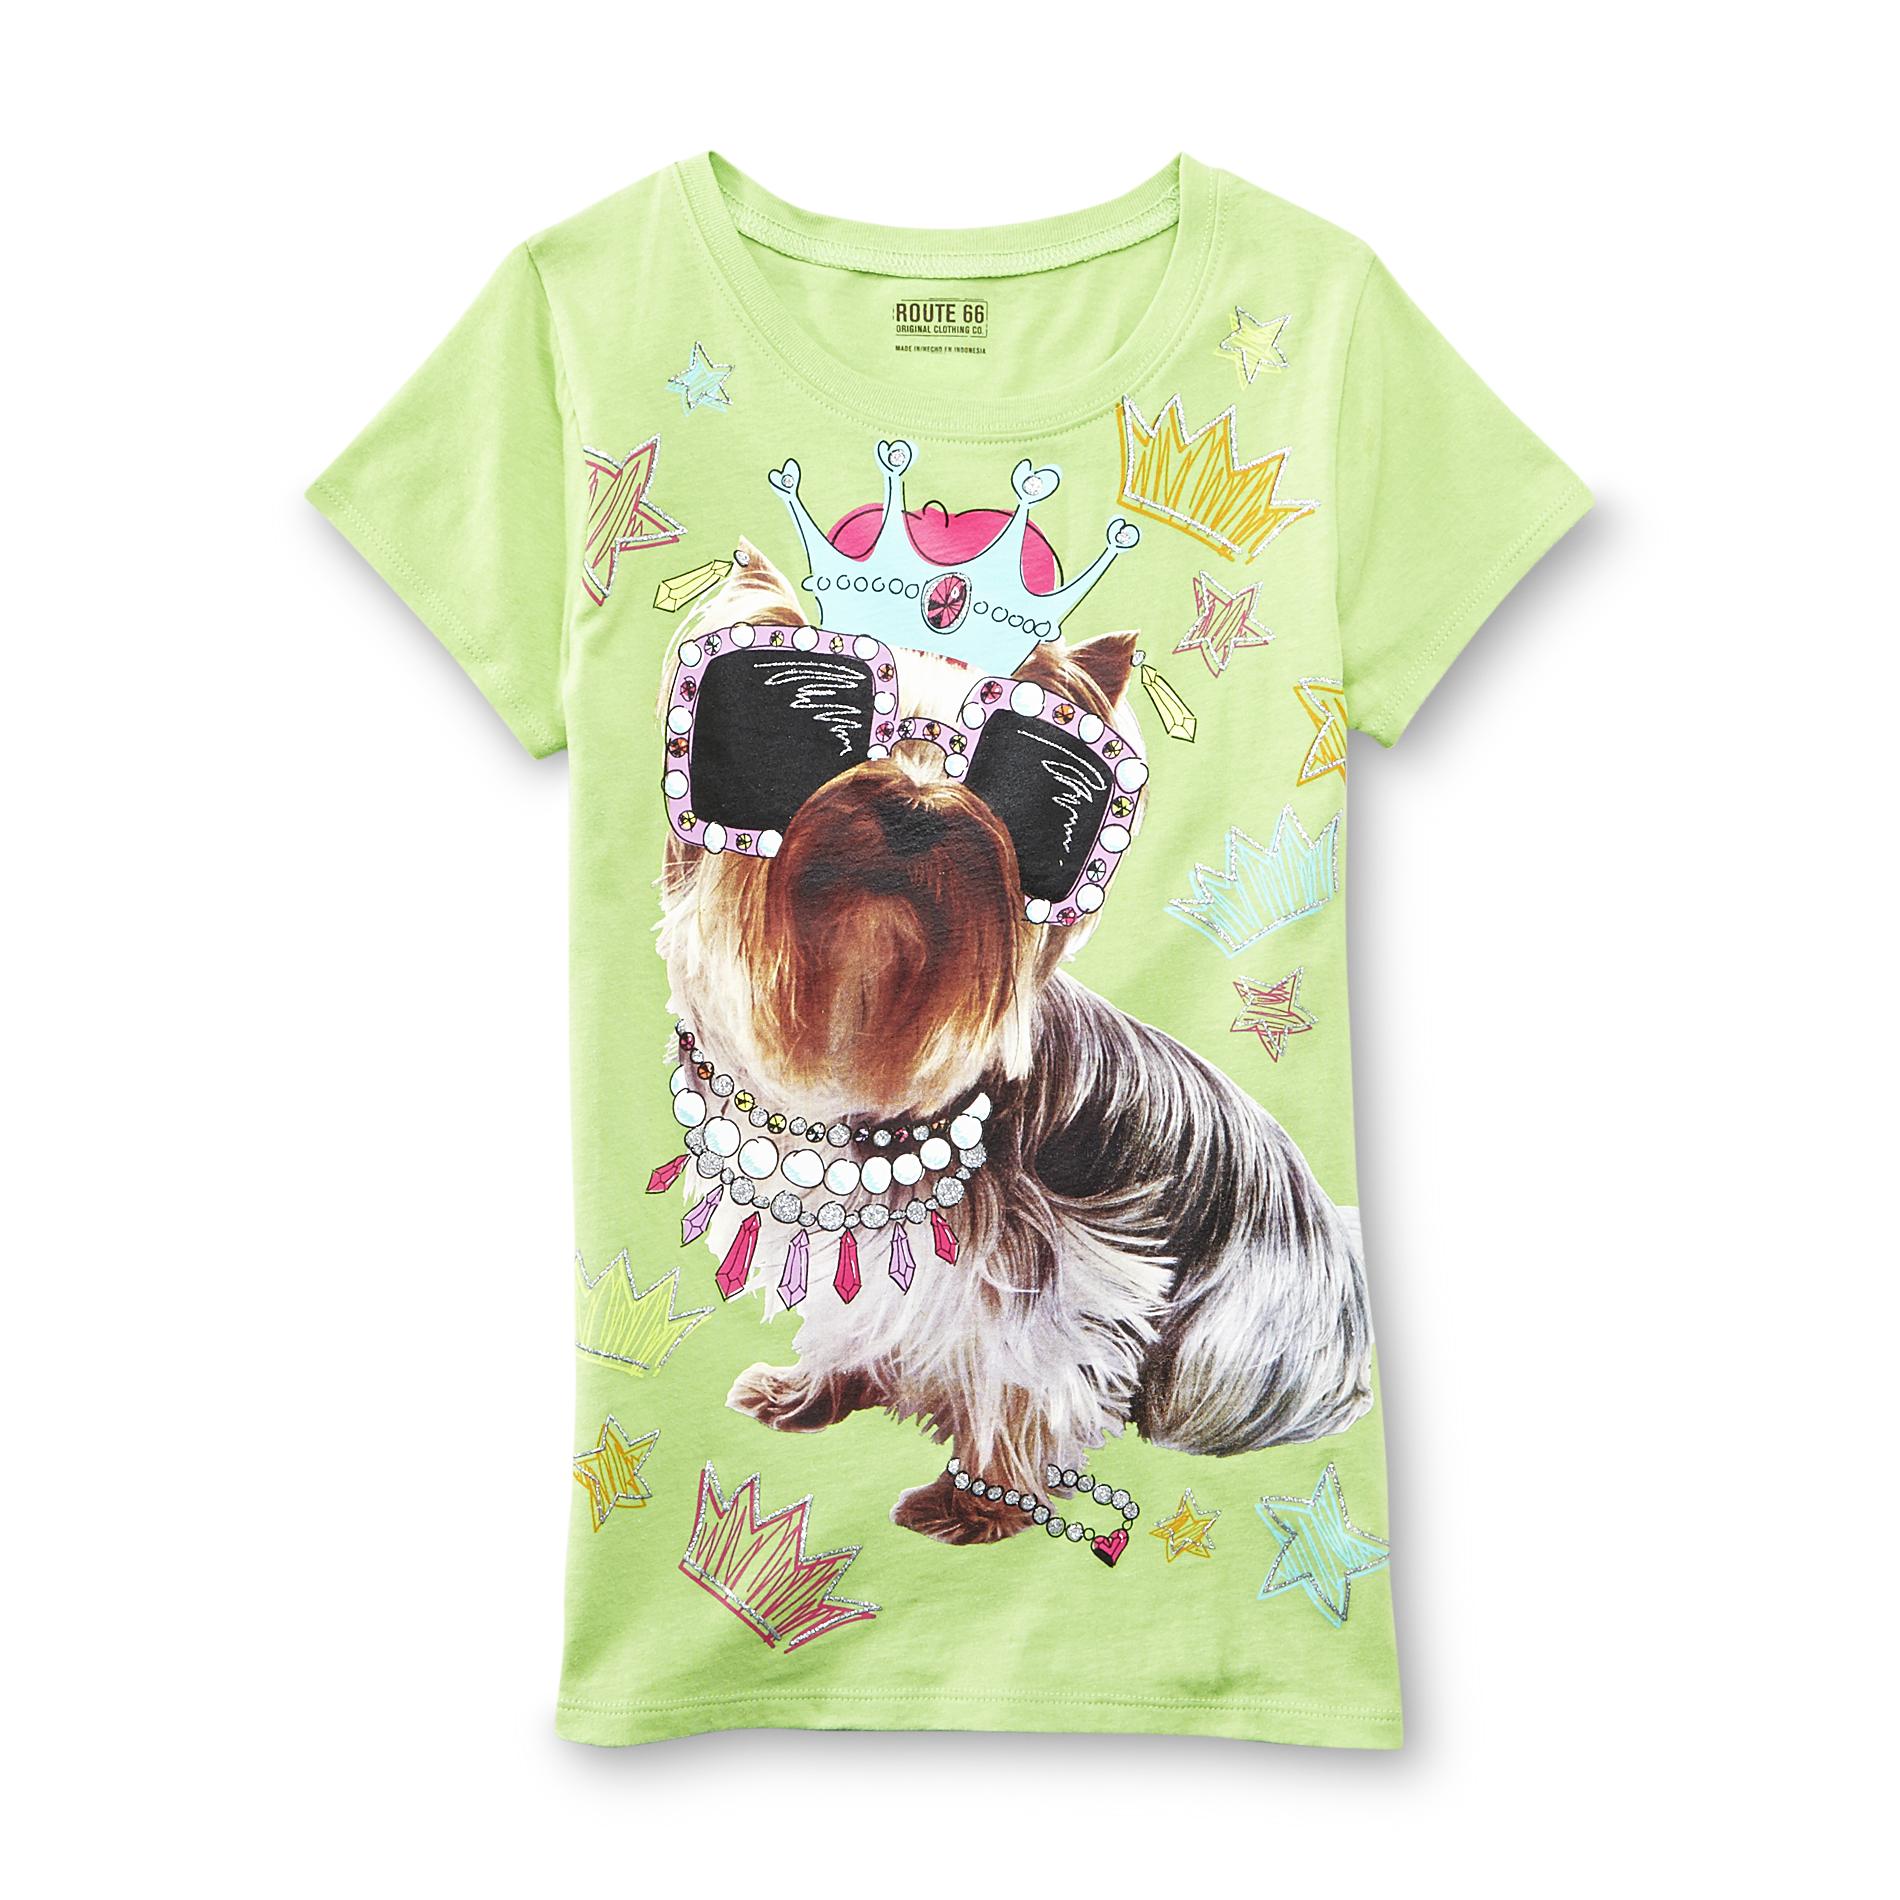 Route 66 Girl's Graphic T-Shirt - Royal Puppy Dog